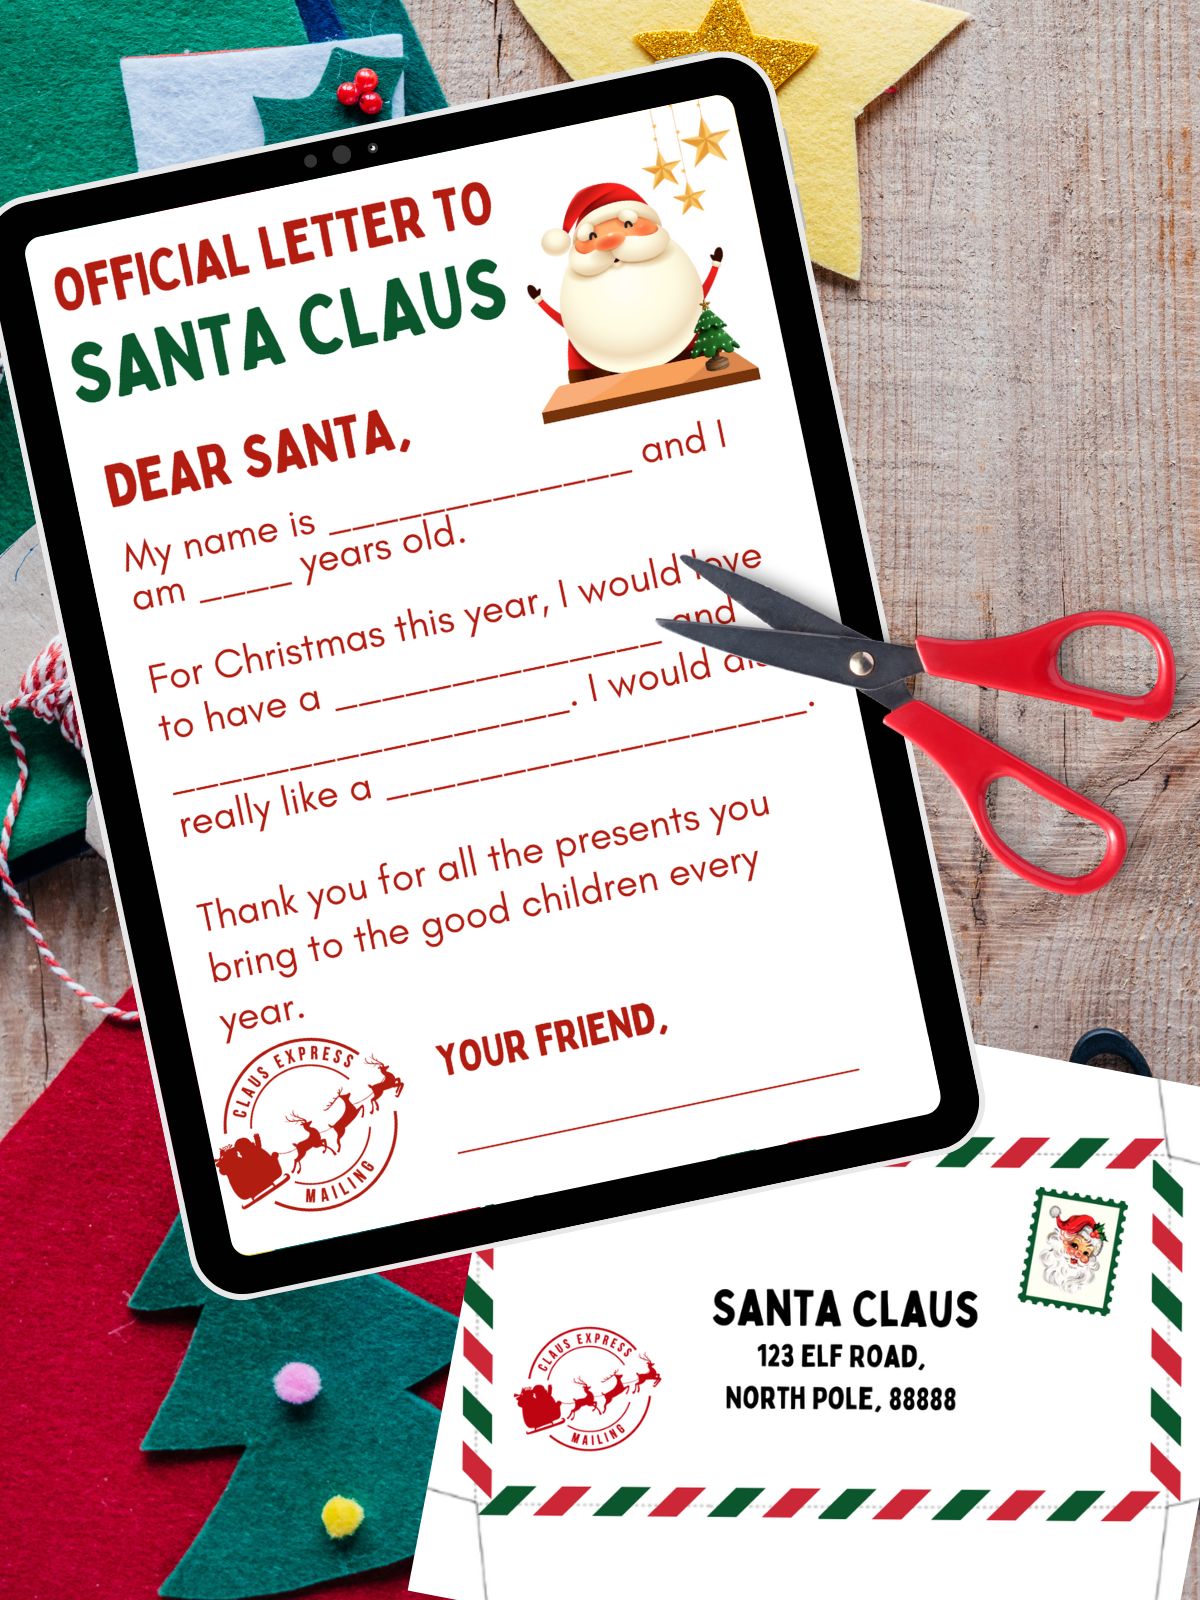 Printable letter to Santa with envelope.